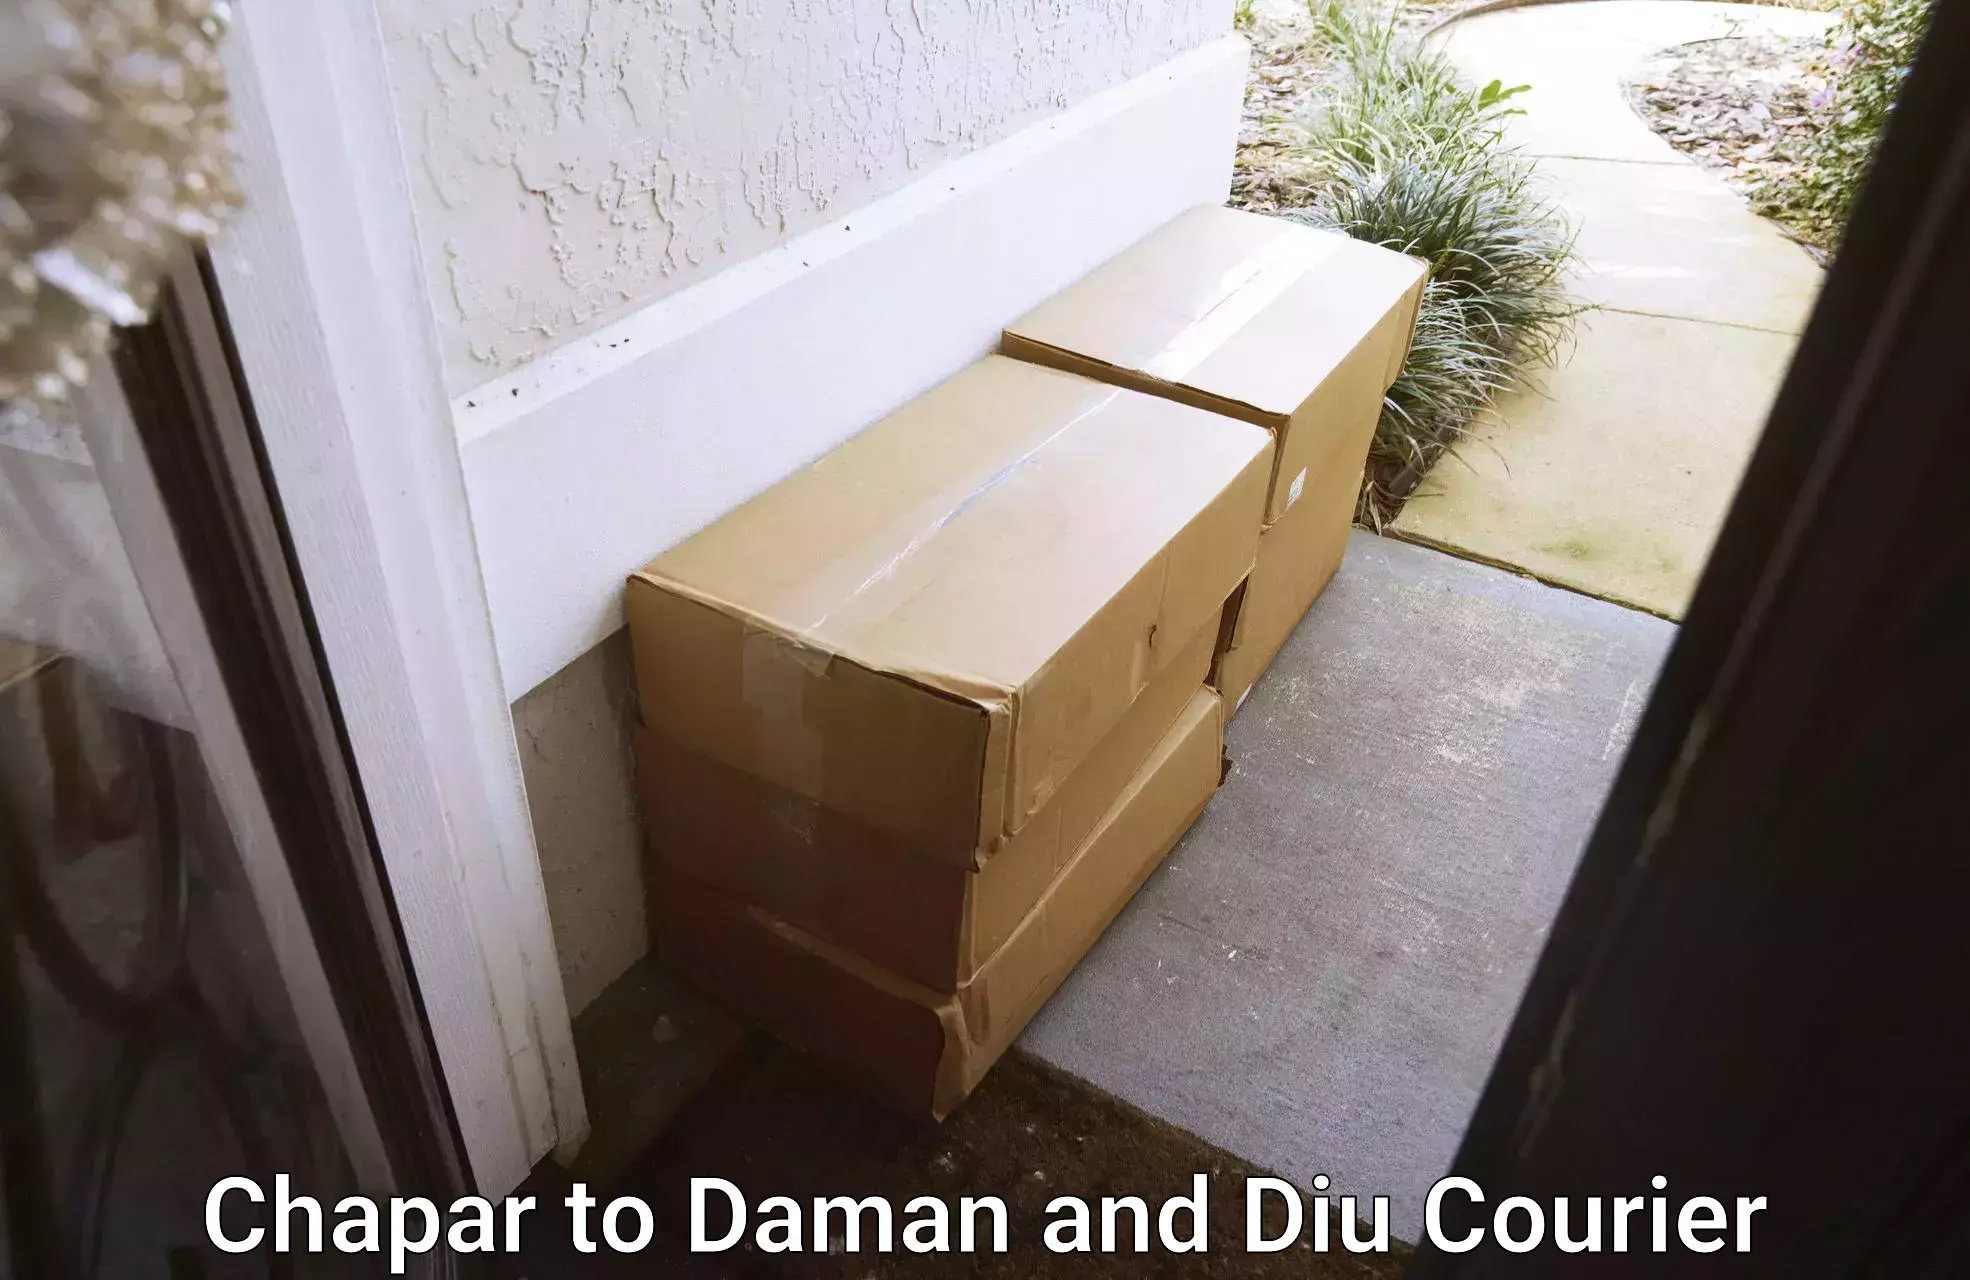 High-priority parcel service Chapar to Daman and Diu